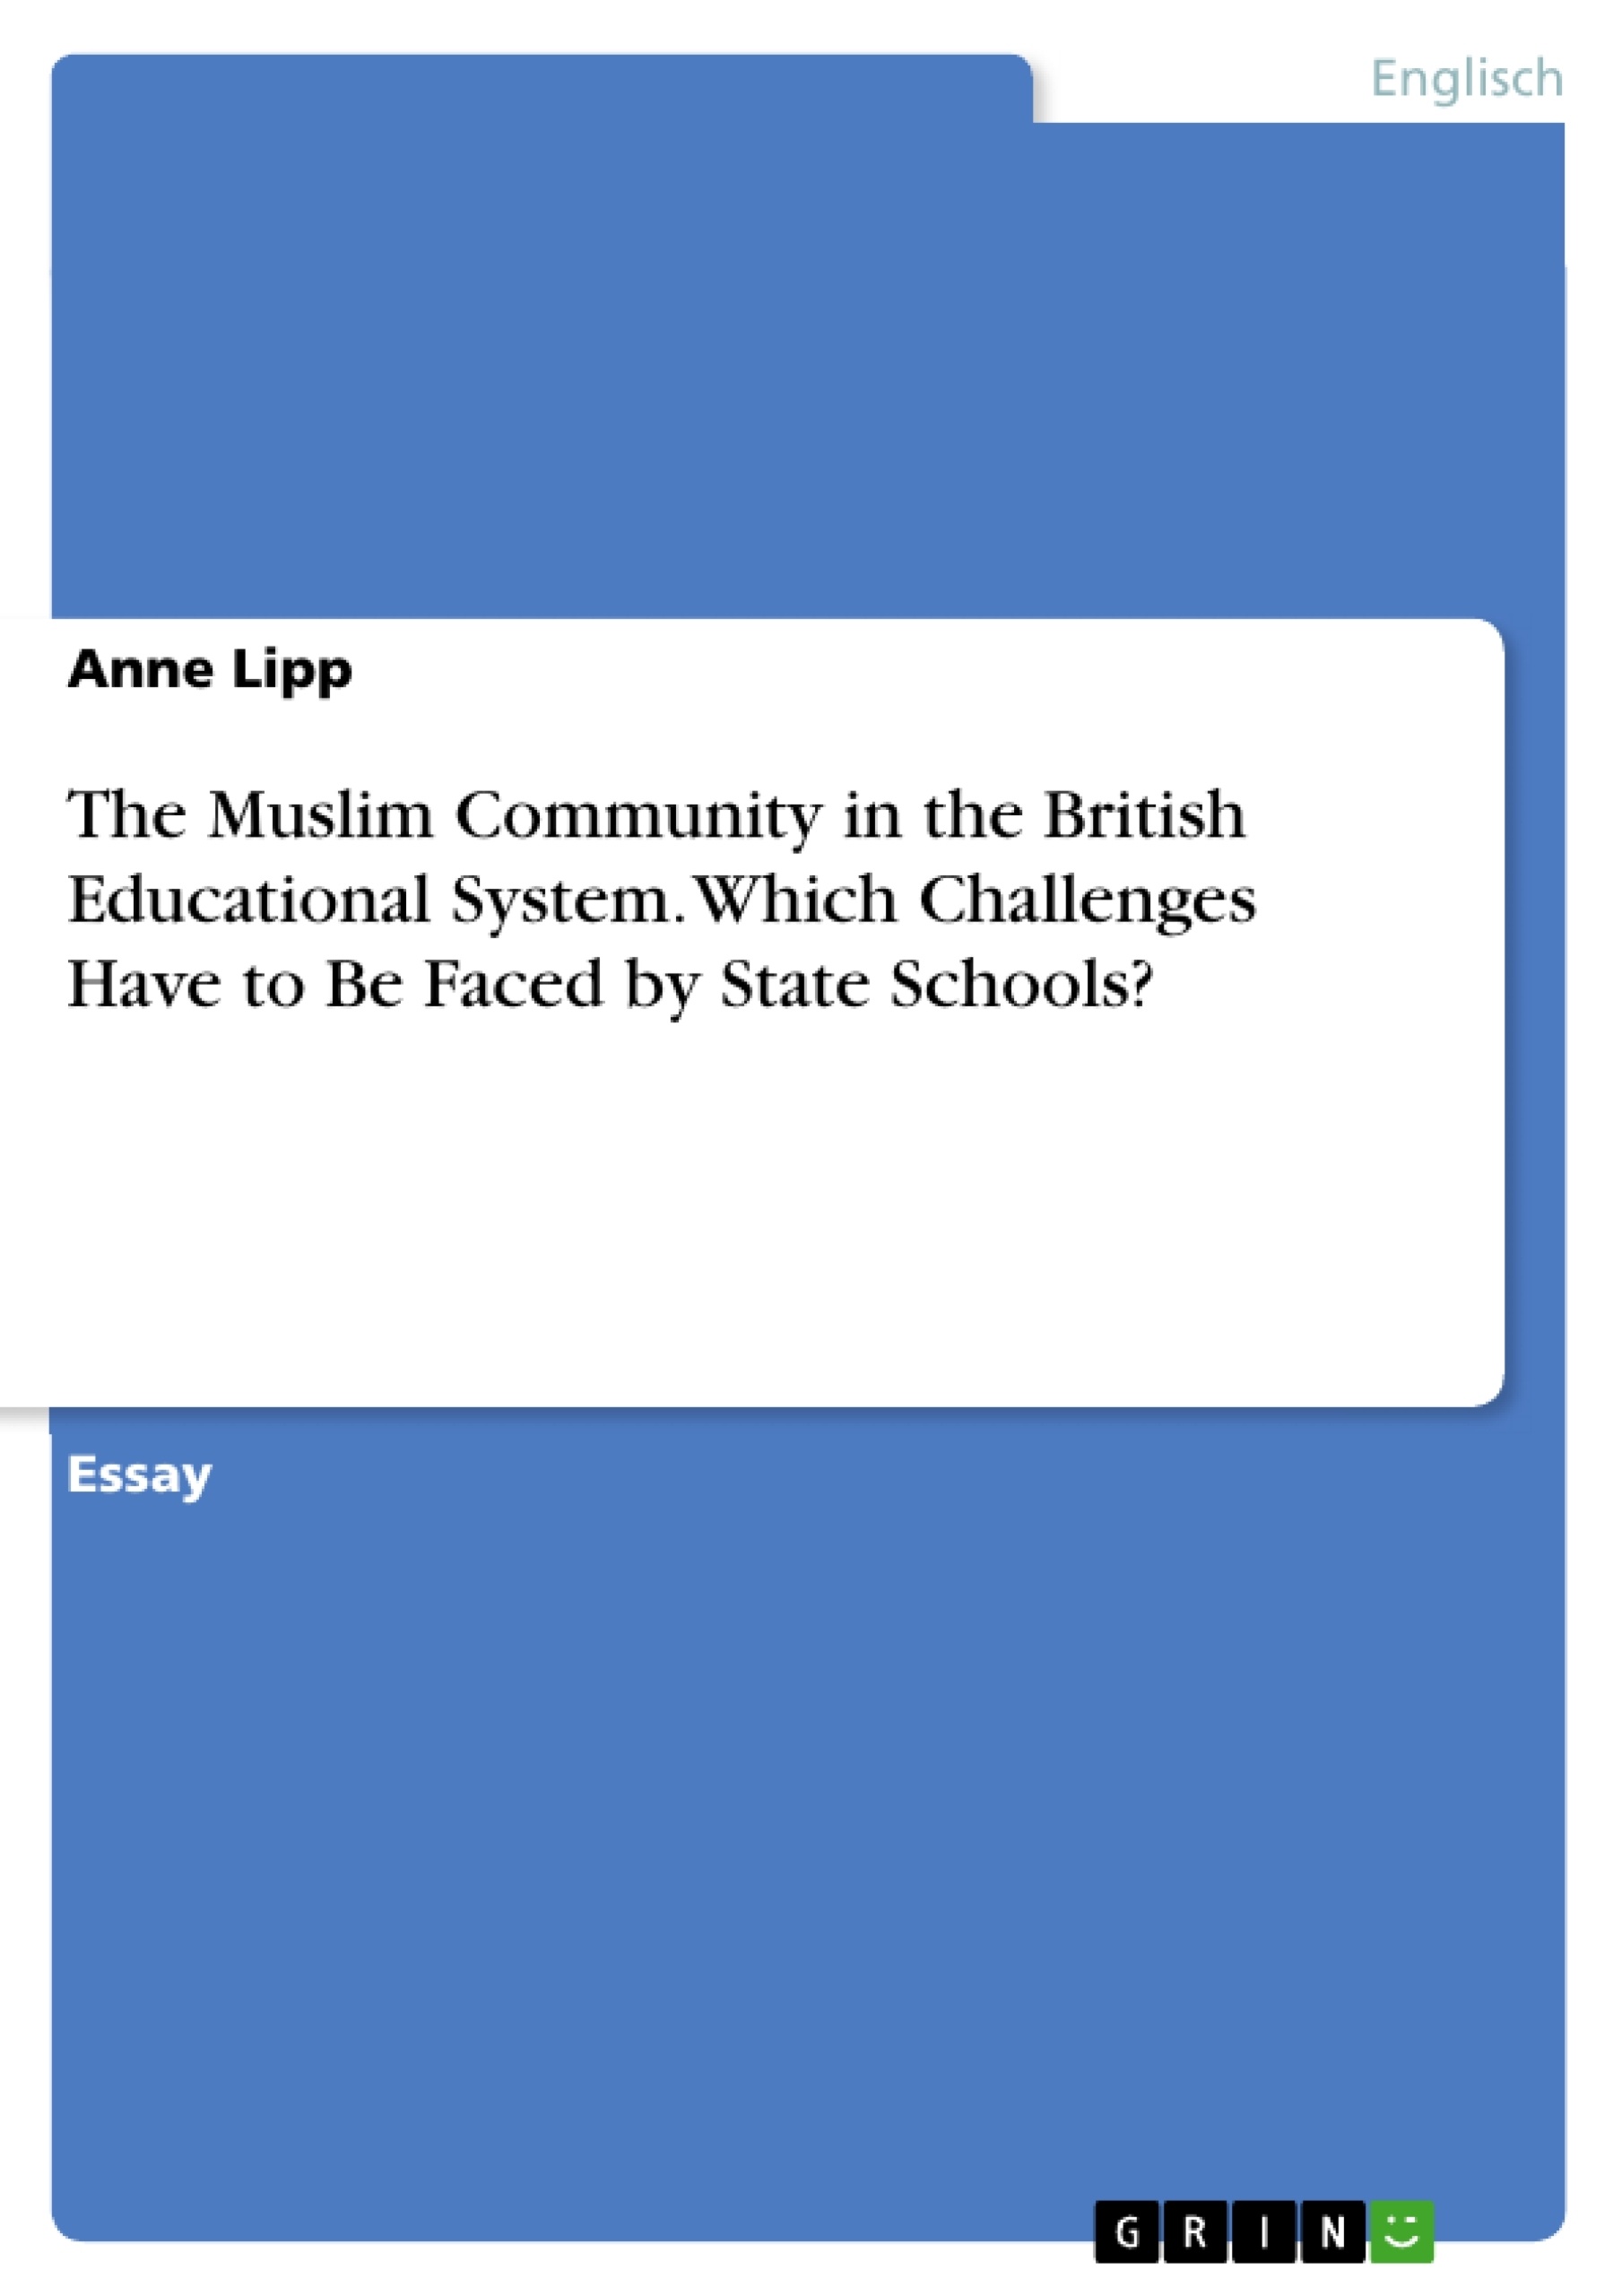 Título: The Muslim Community in the British Educational System. Which Challenges Have to Be Faced by State Schools?